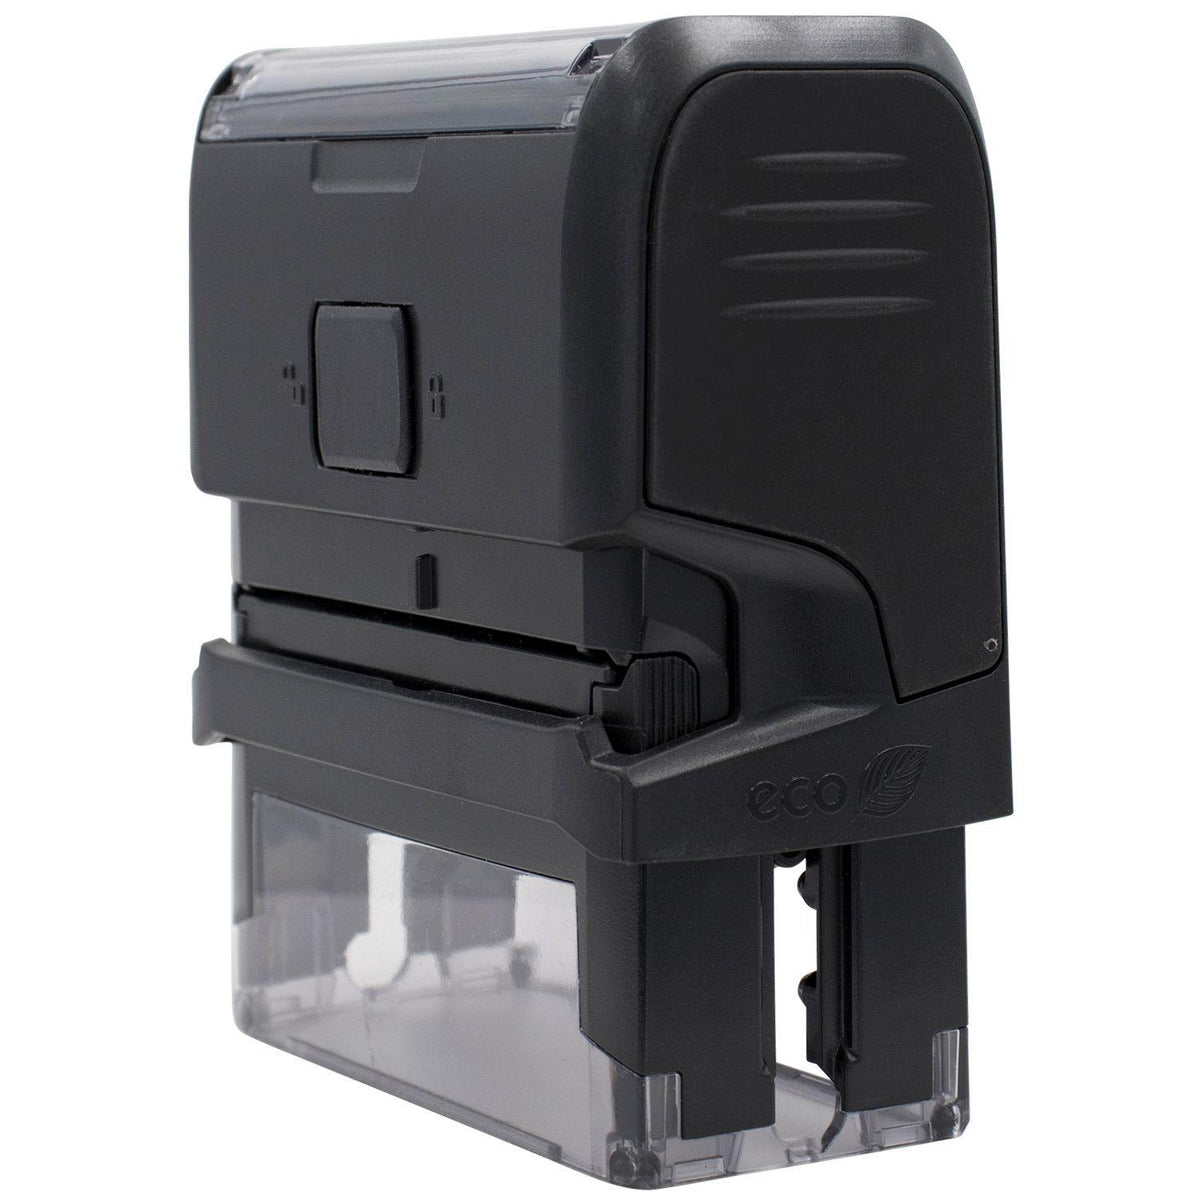 Side View of Large Self-Inking Cleaned and Sanitized Stamp at an Angle